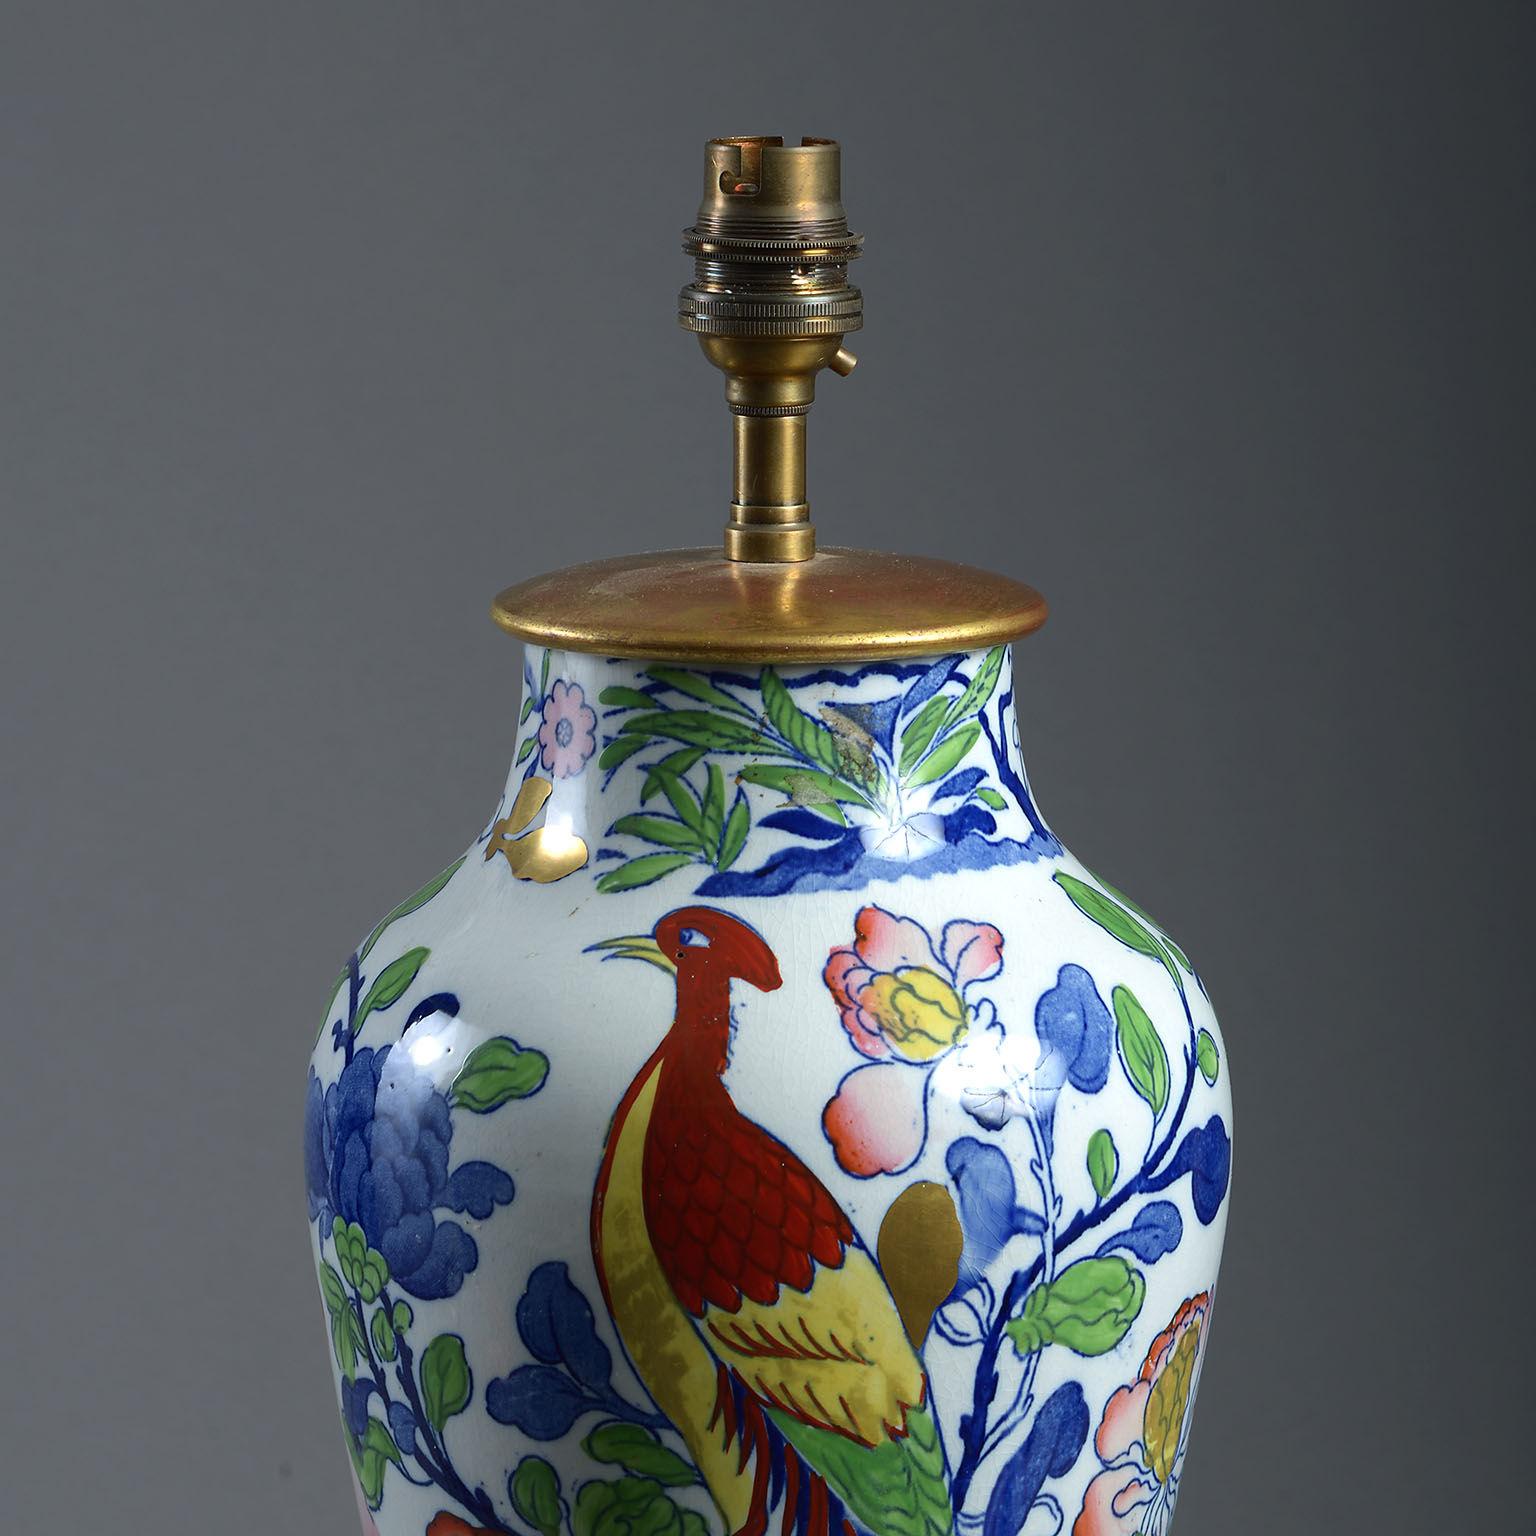 The baluster form decorated with an exotic bird amongst foliage, in colours over a blue transfer. 

With a giltwood cover and standing on a giltwood base. 

Wired with cloth-covered flex.